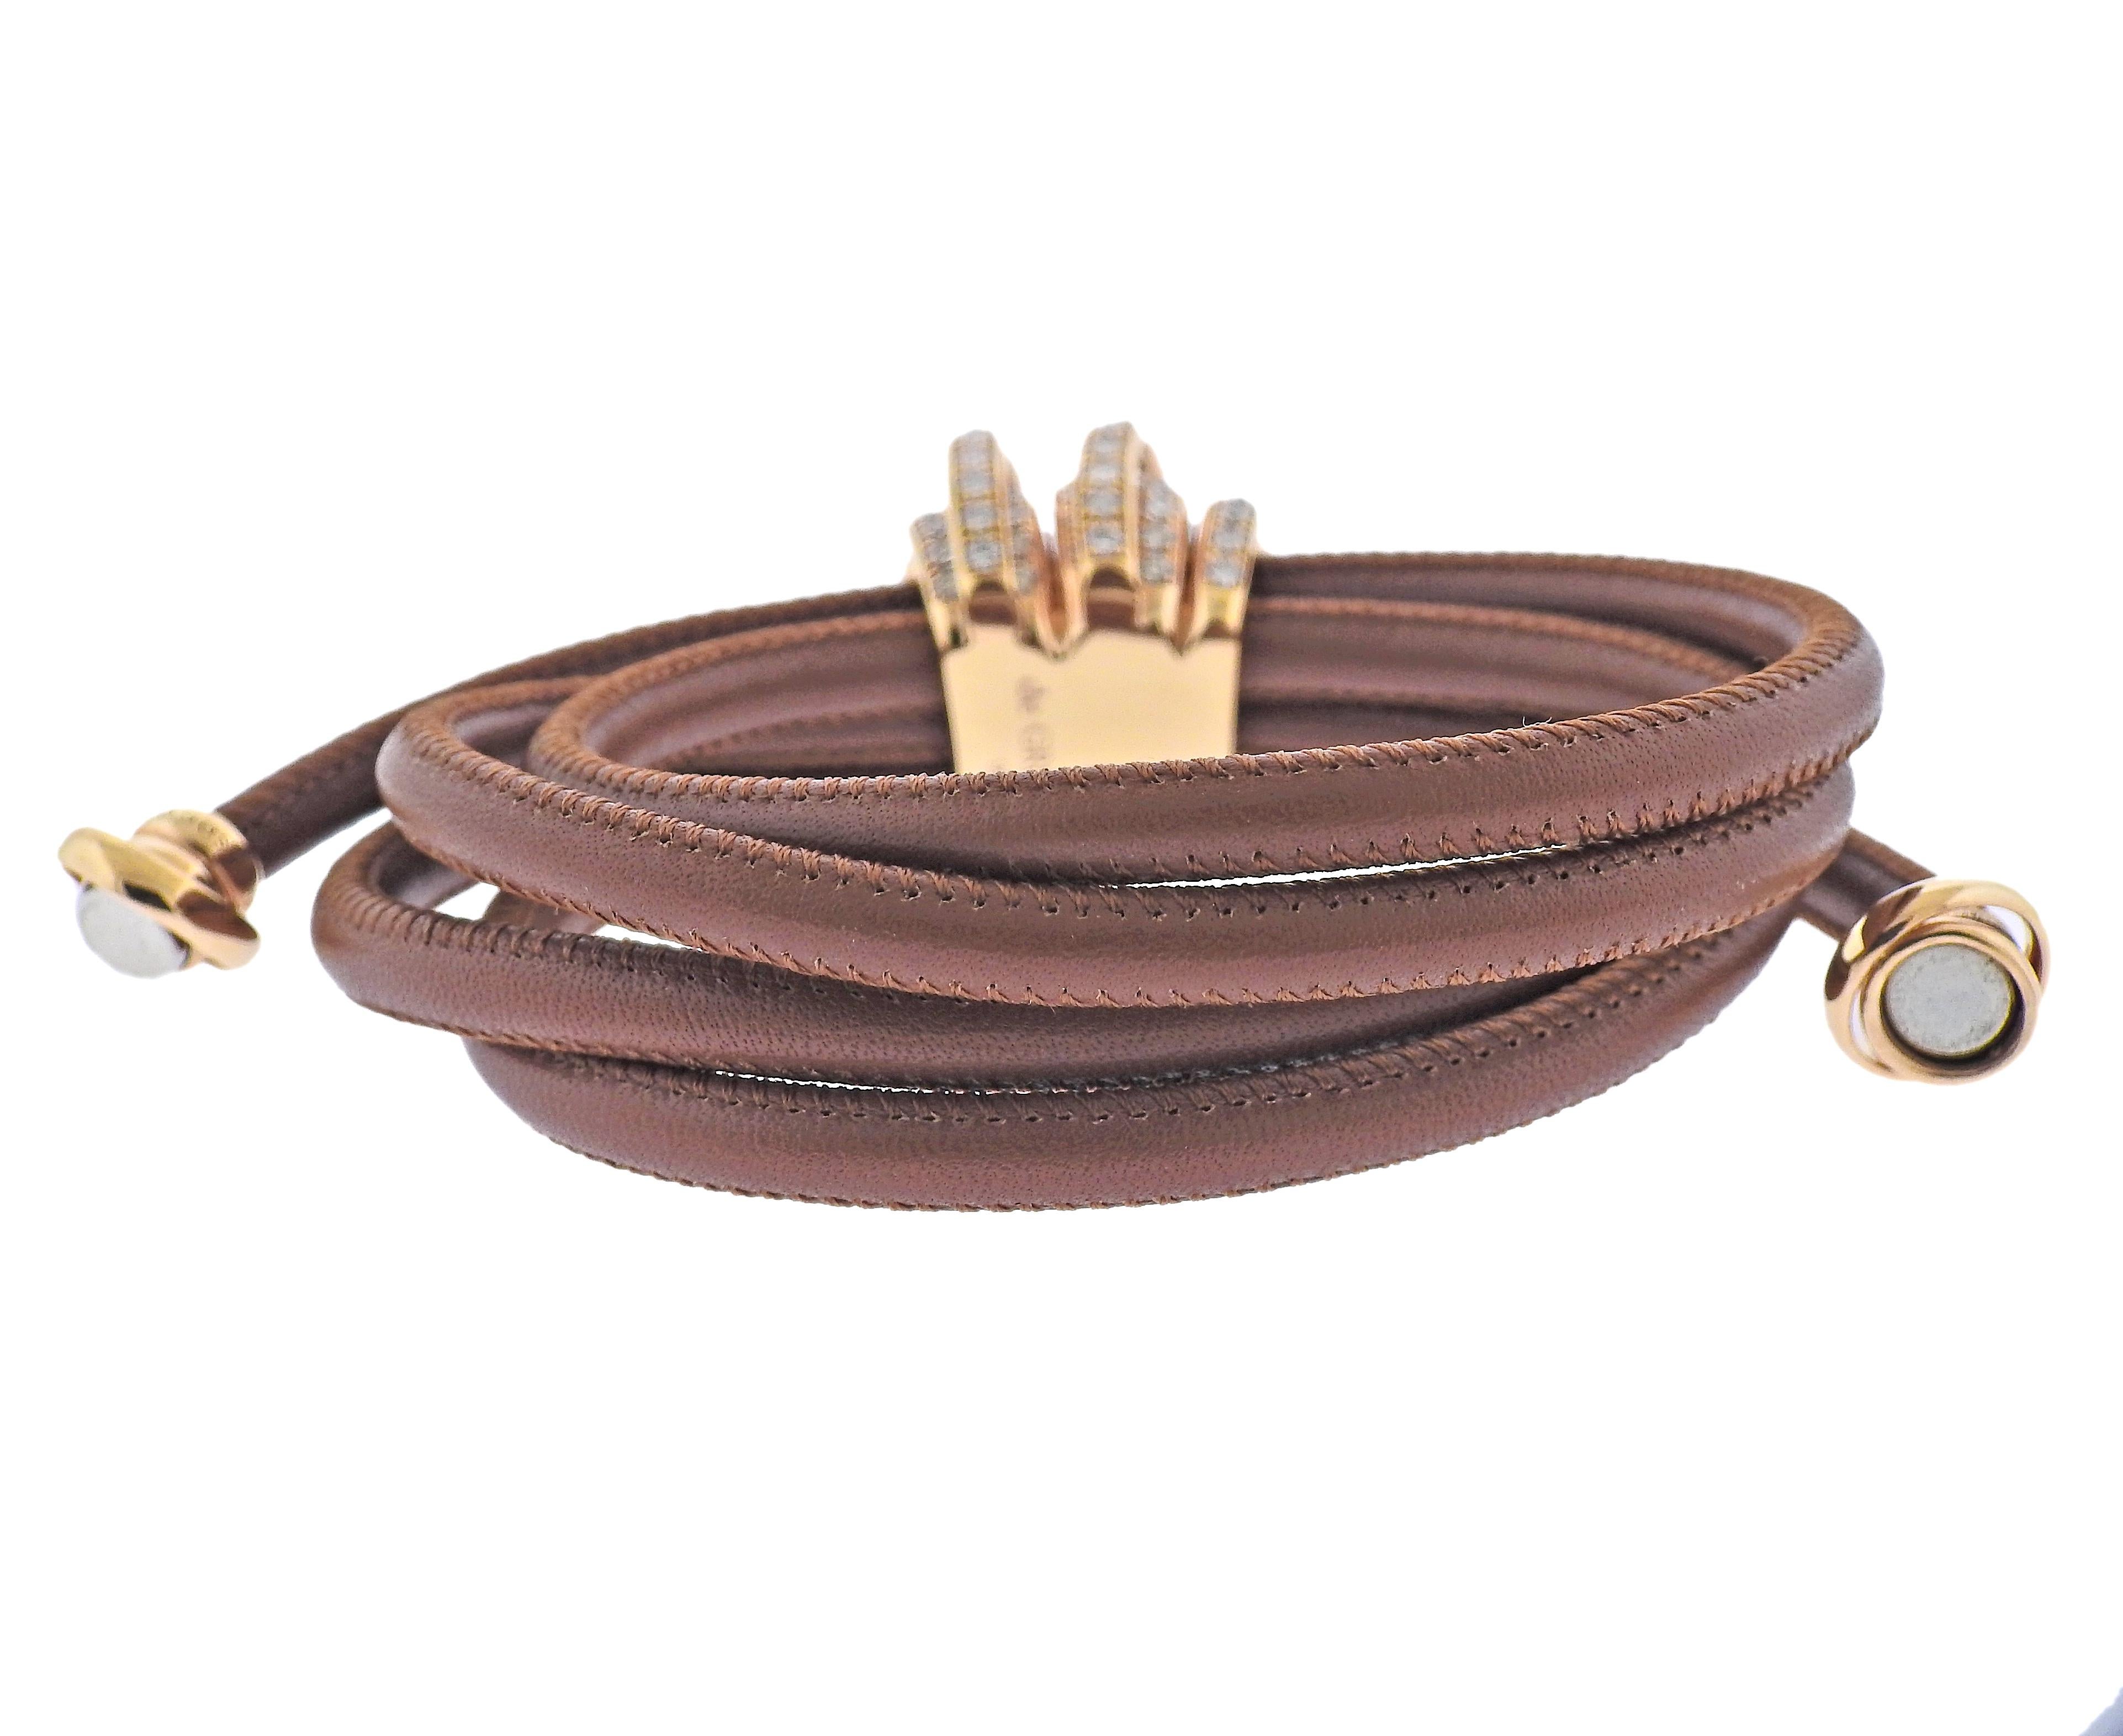 De Grisogono 18k gold and brown leather bracelet, set with 3.60ctw VVS/FG diamonds. Comes with COA. New/store sample, with tag. Bracelet is adjustable, Gold center measures 25mm x 21mm, magnetic 18k gold ends/closures. Weight - 33.5 grams. Marked: